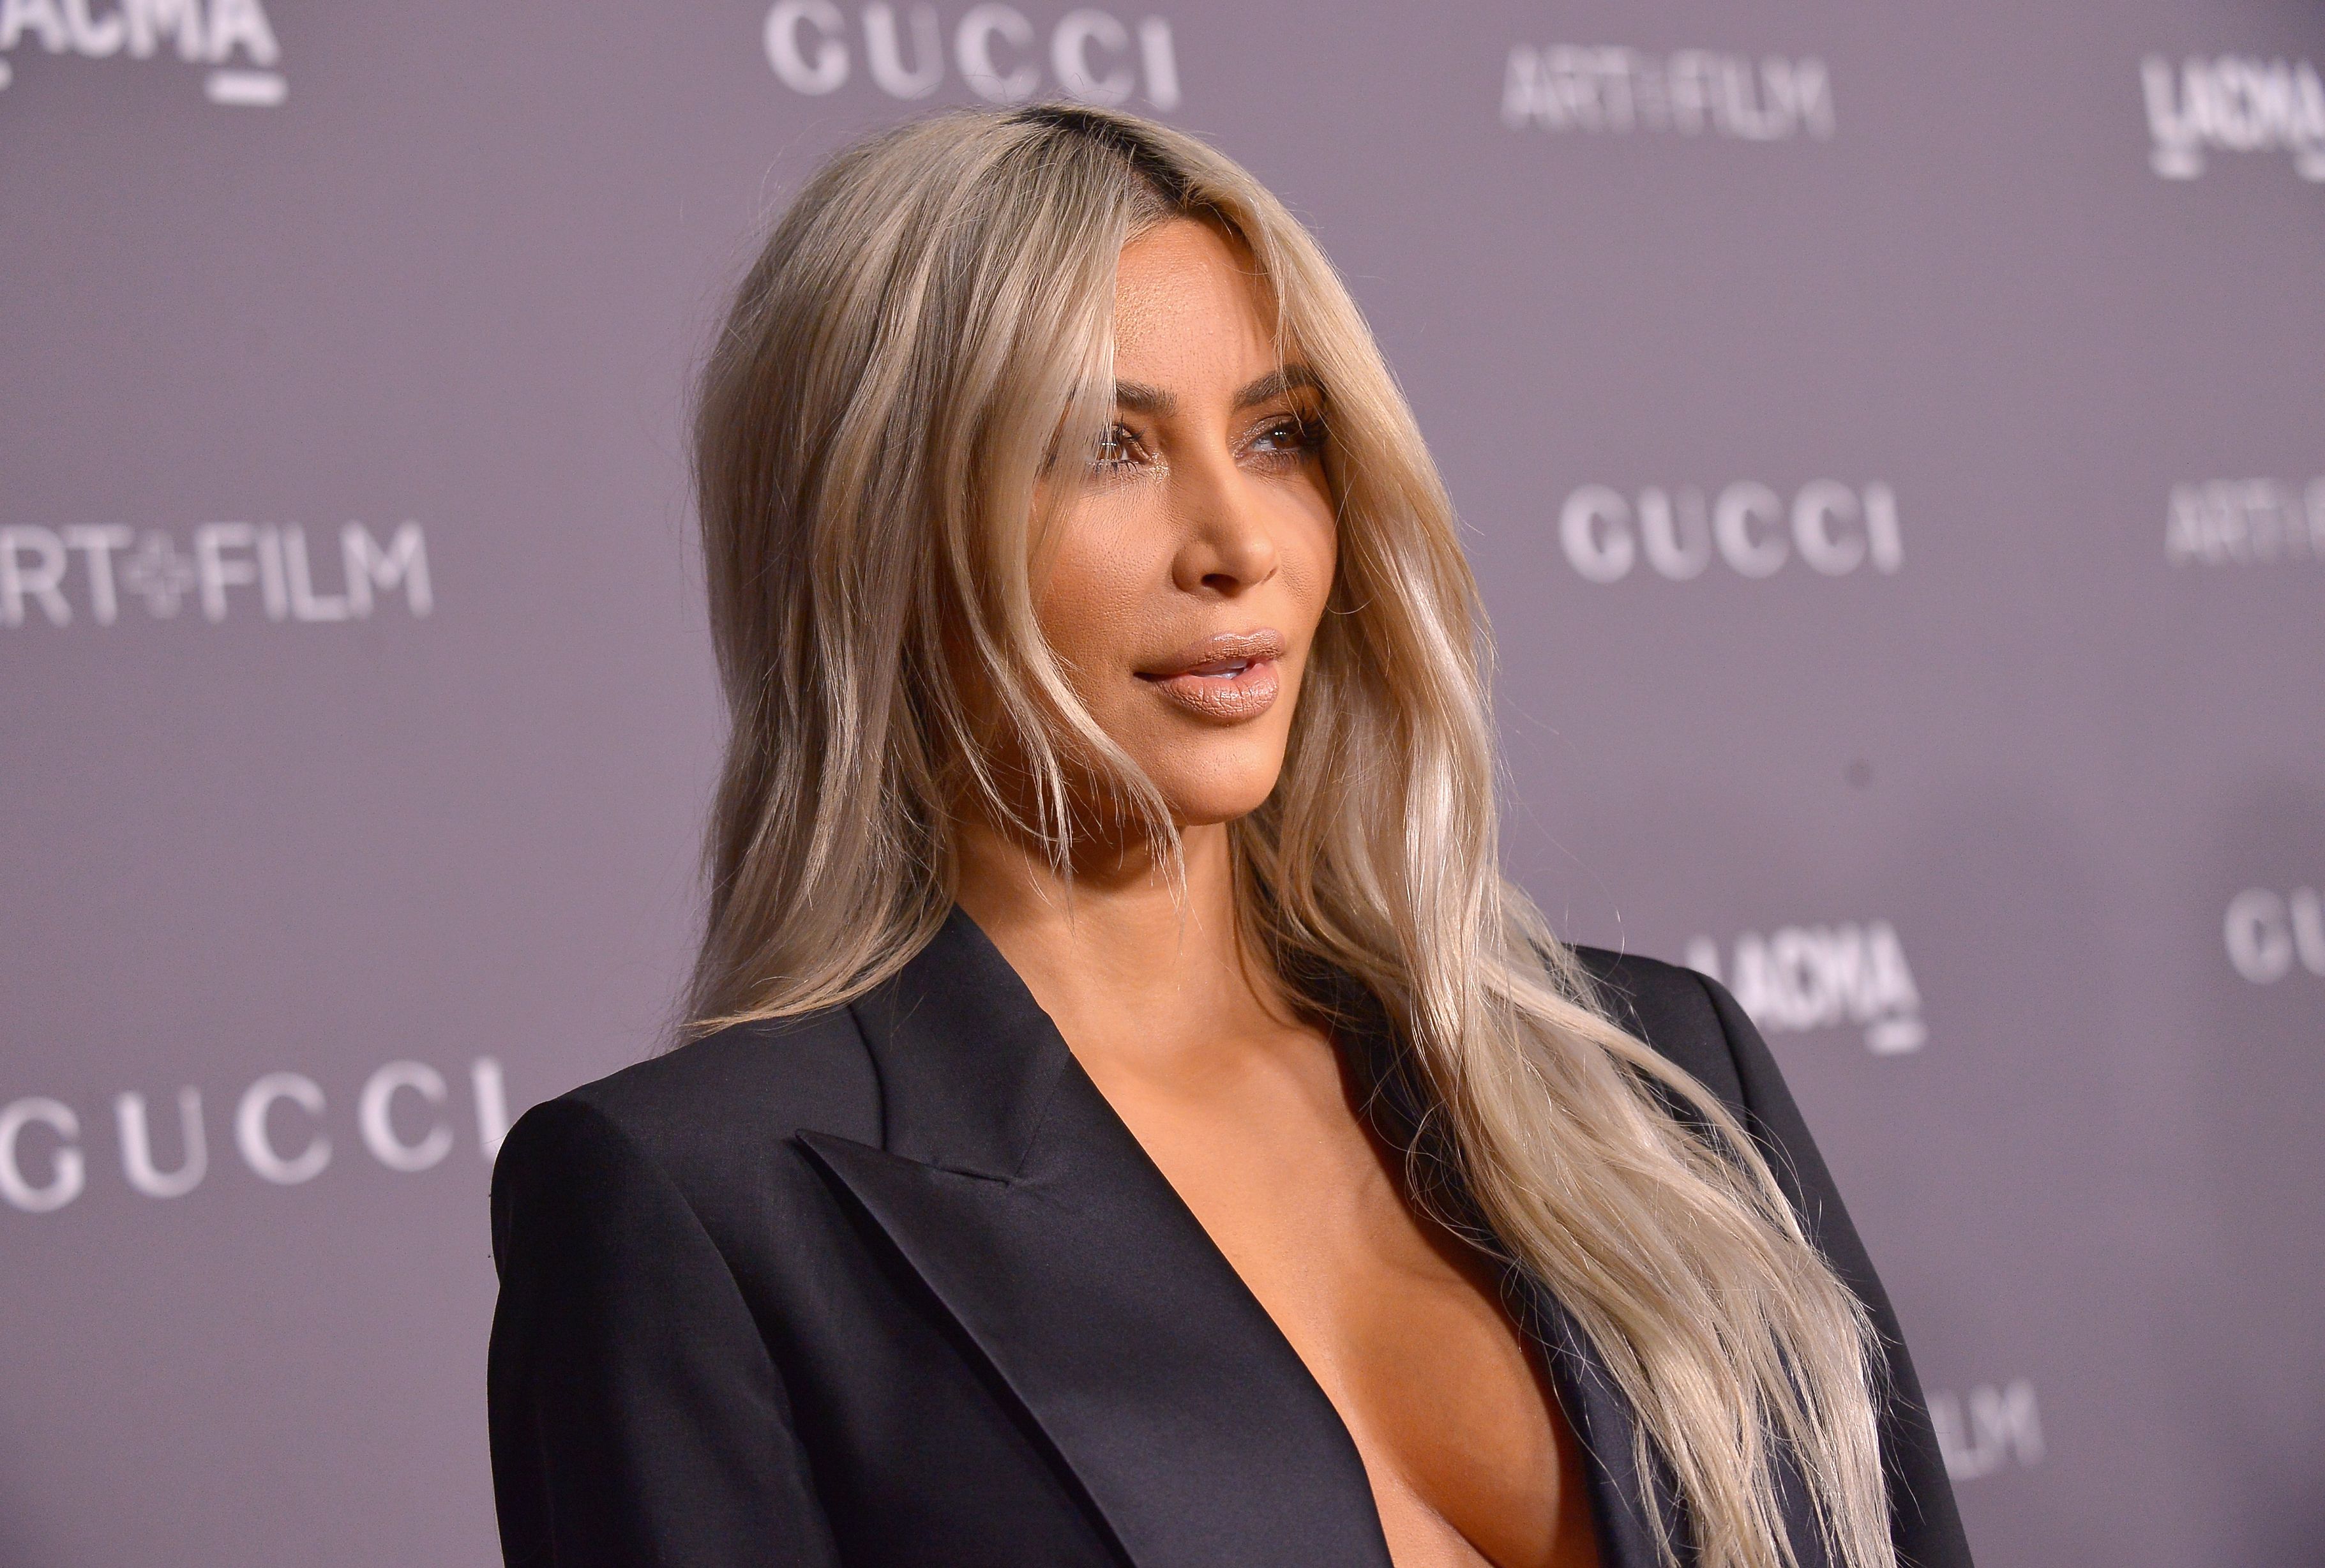 Kim Kardashian West at the 2017 LACMA Art + Film Gala Honoring Mark Bradford and George Lucas presented by Gucci at LACMA on November 4, 2017 | Photo: Getty Images